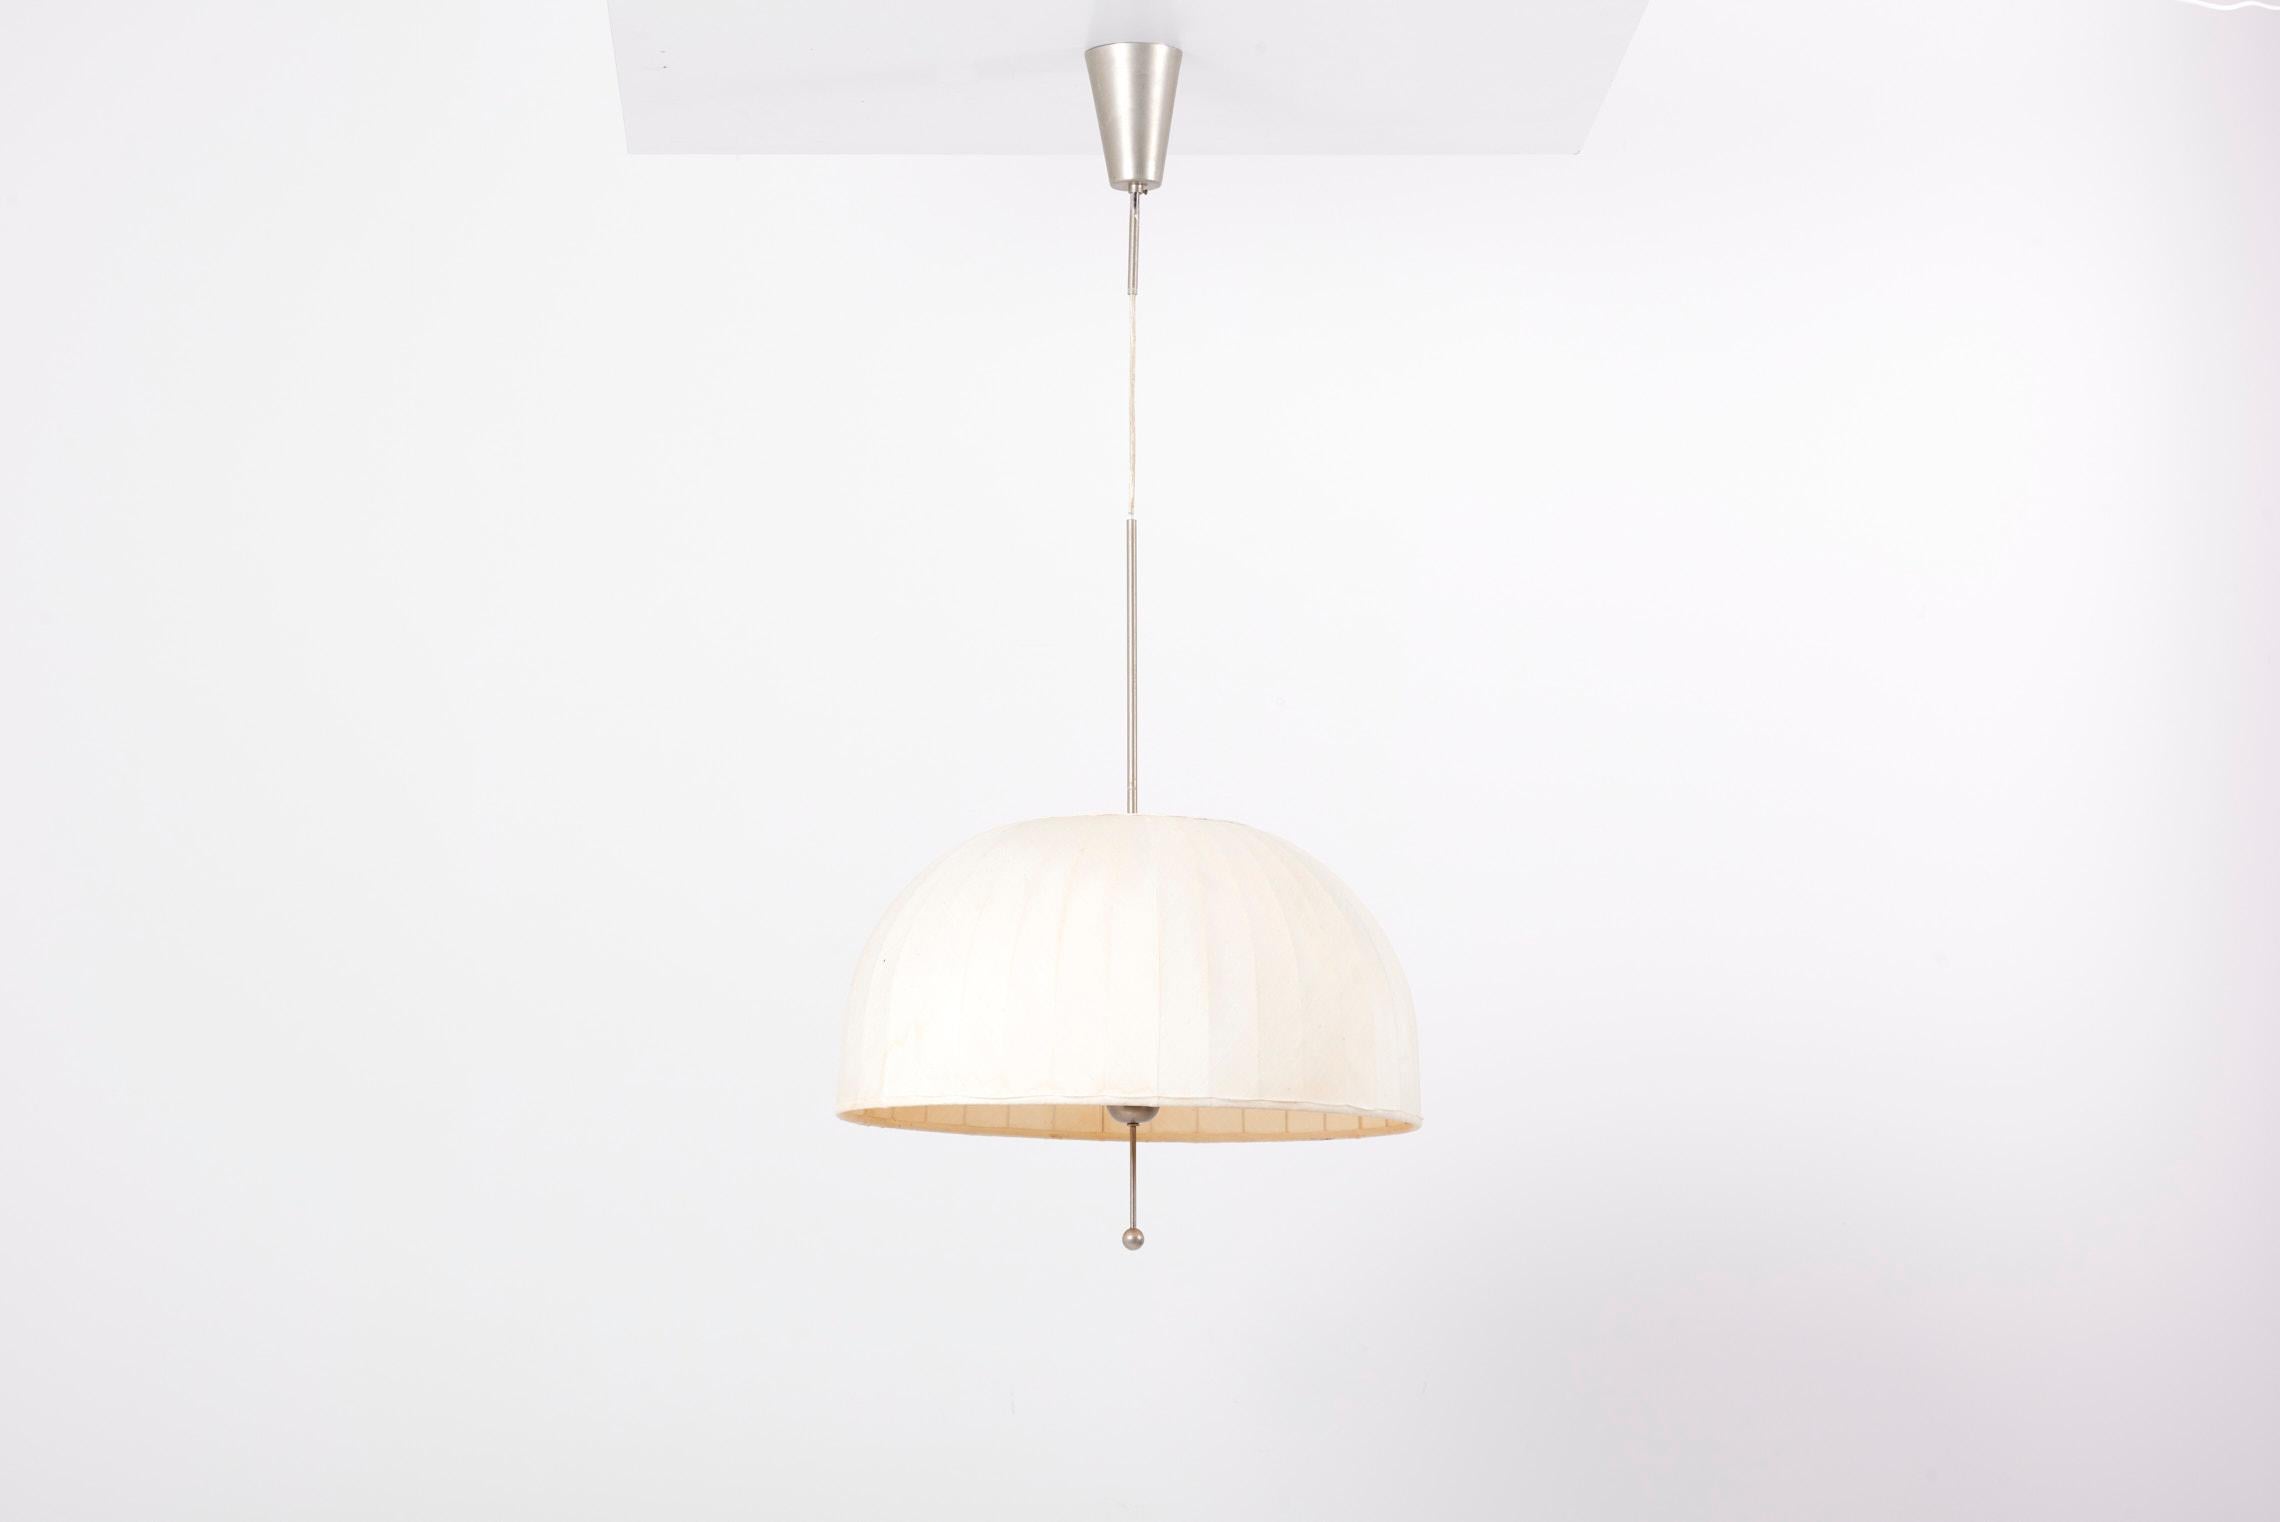 Pendant lamp, huge model of T549, in steel. Designed by Hans-Agne Jakobsson in 1960s and manufactured by AB Markaryd in Sweden. Original Shade with some wear in color. 

6 x E27 sockets, each with a maximum of 60 watts.

Please note: Lamp should